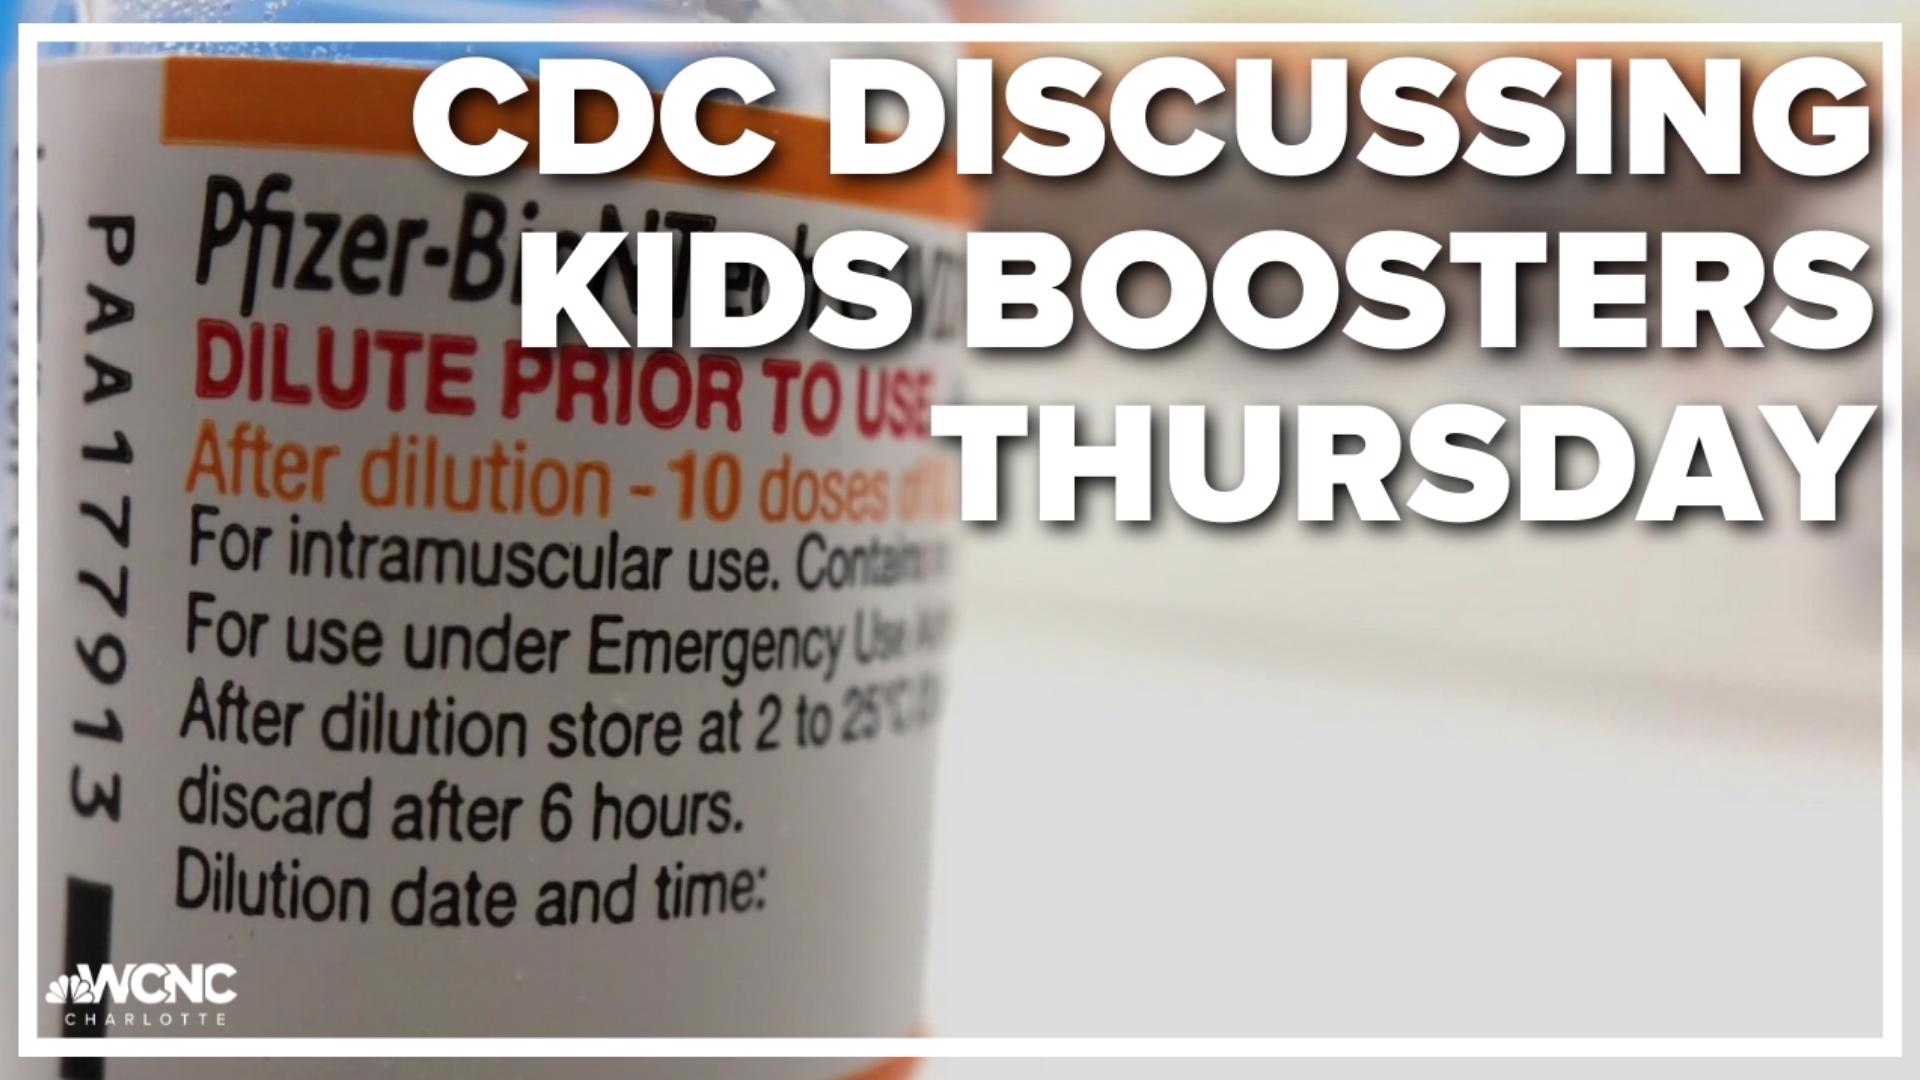 Tuesday, the FDA approved the third dose for kids ages 5 to 11.